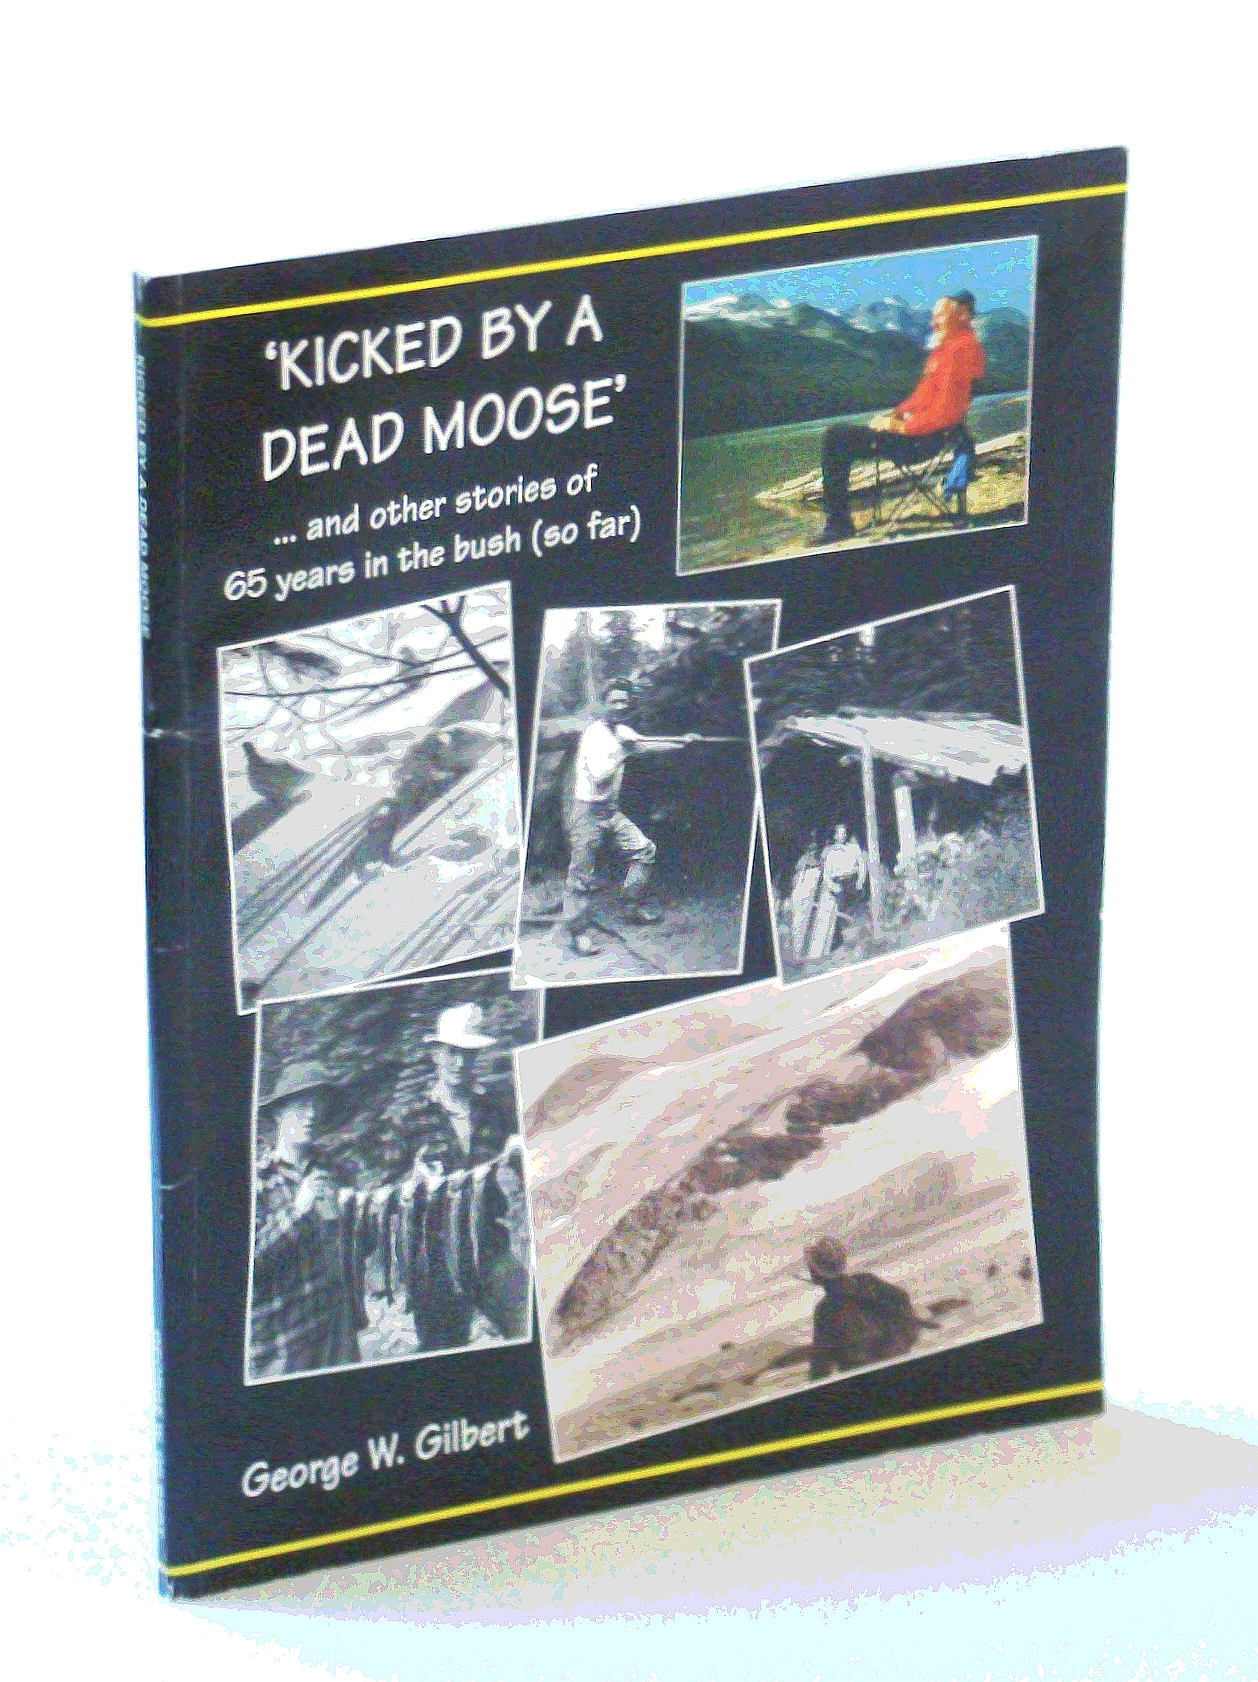 Image for 'Kicked By A Dead Moose' and other stories of 65 years in the bush (so far)